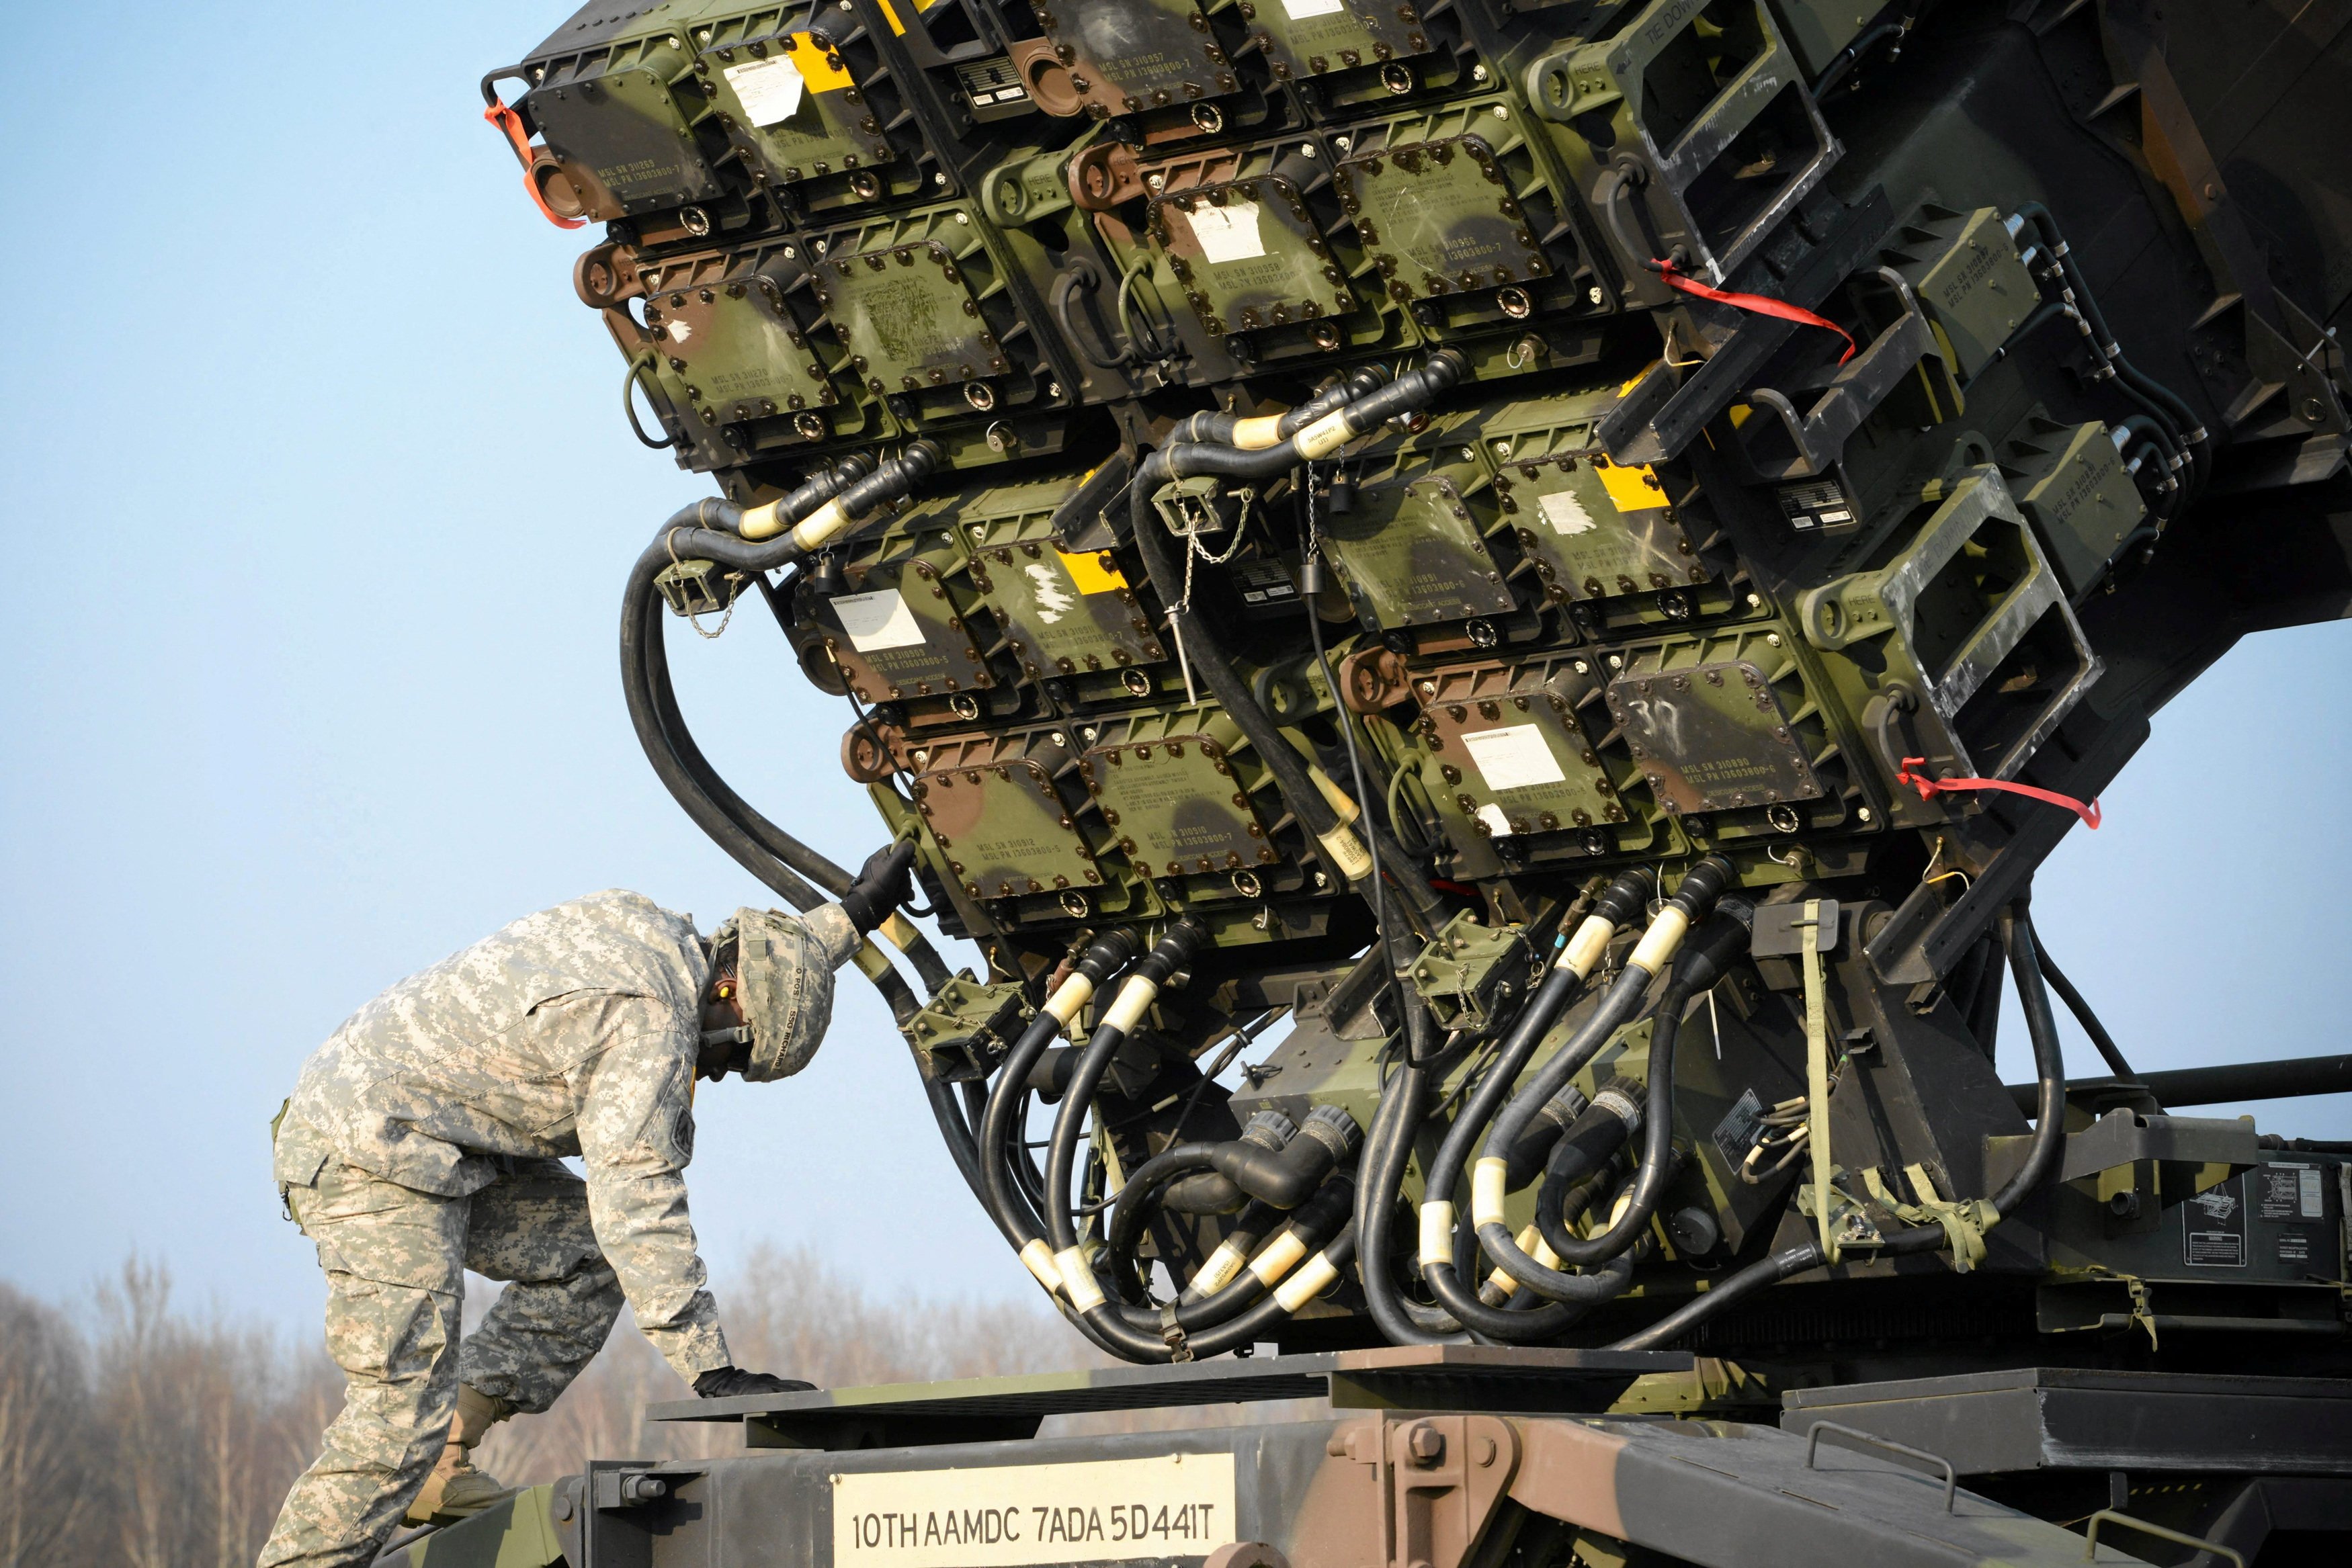 A US soldier inspects a Patriot missile defence battery during join exercises at military grounds in Sochaczew, near Warsaw. The government is planning to sell PAC-2 and some more advanced PAC-3 interceptors made in Japan to the US, according to officials who asked not to be identified. Photo: Reuters